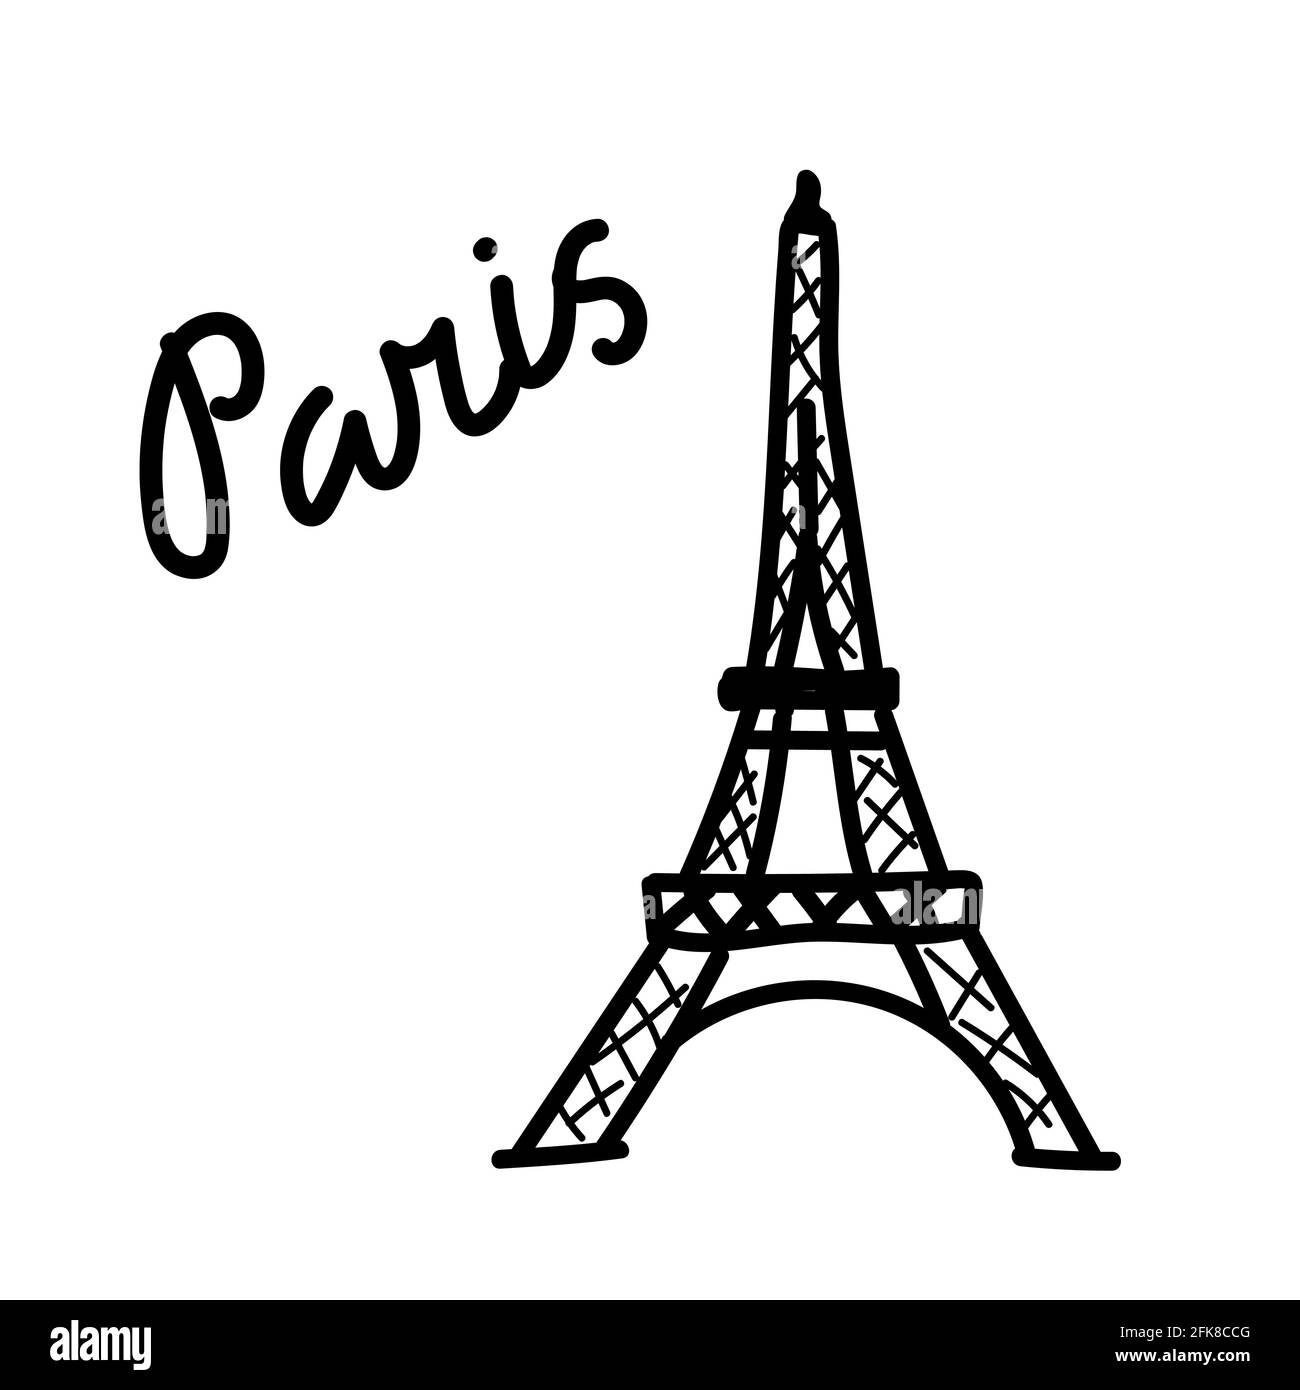 Eifel tower. Hand drawn doodle vector illustration isolated on whithe ...